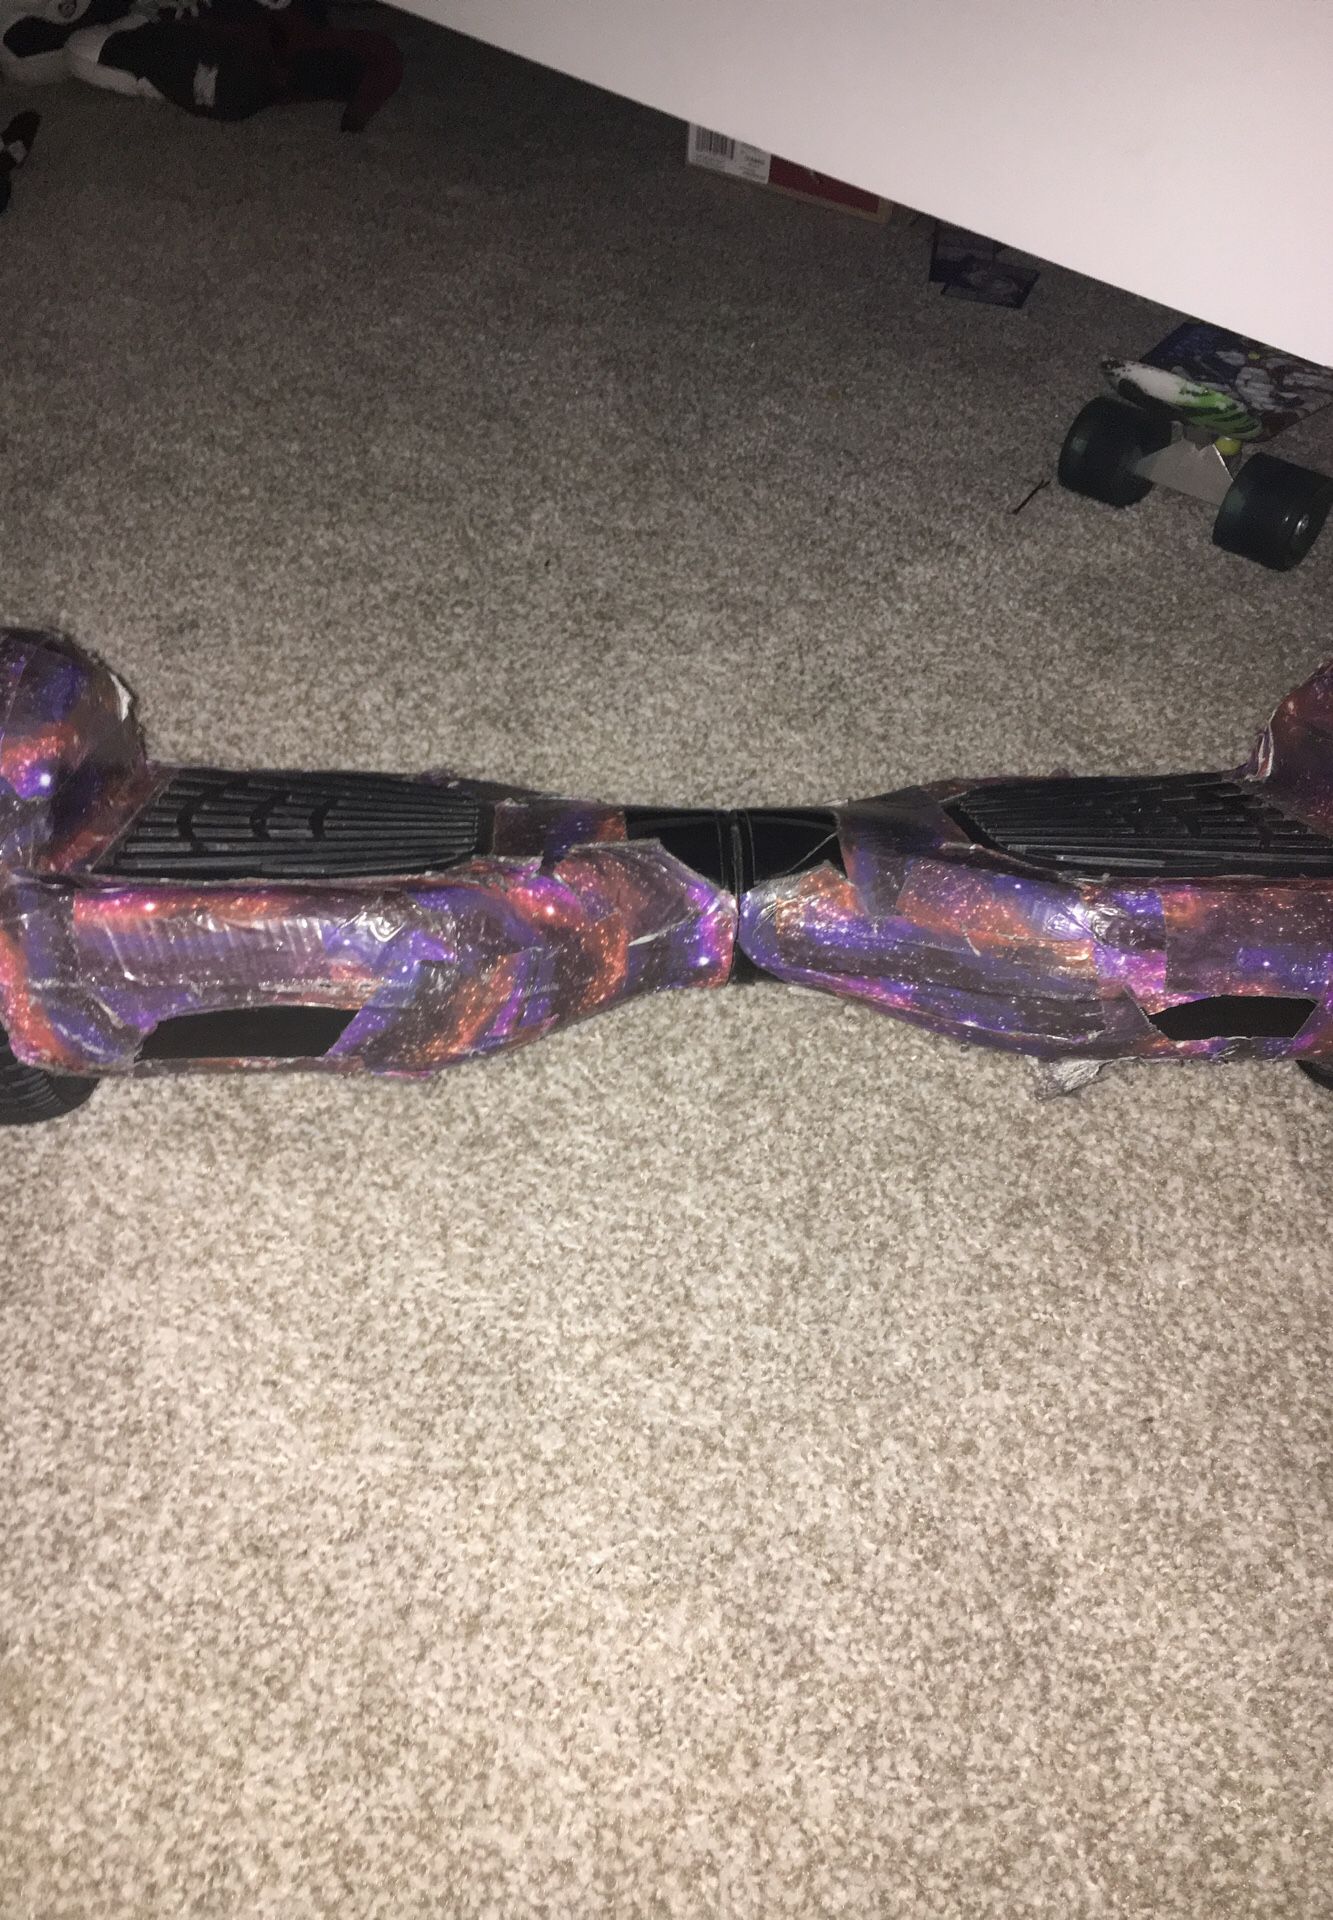 Hoverboard with galaxy tape covering